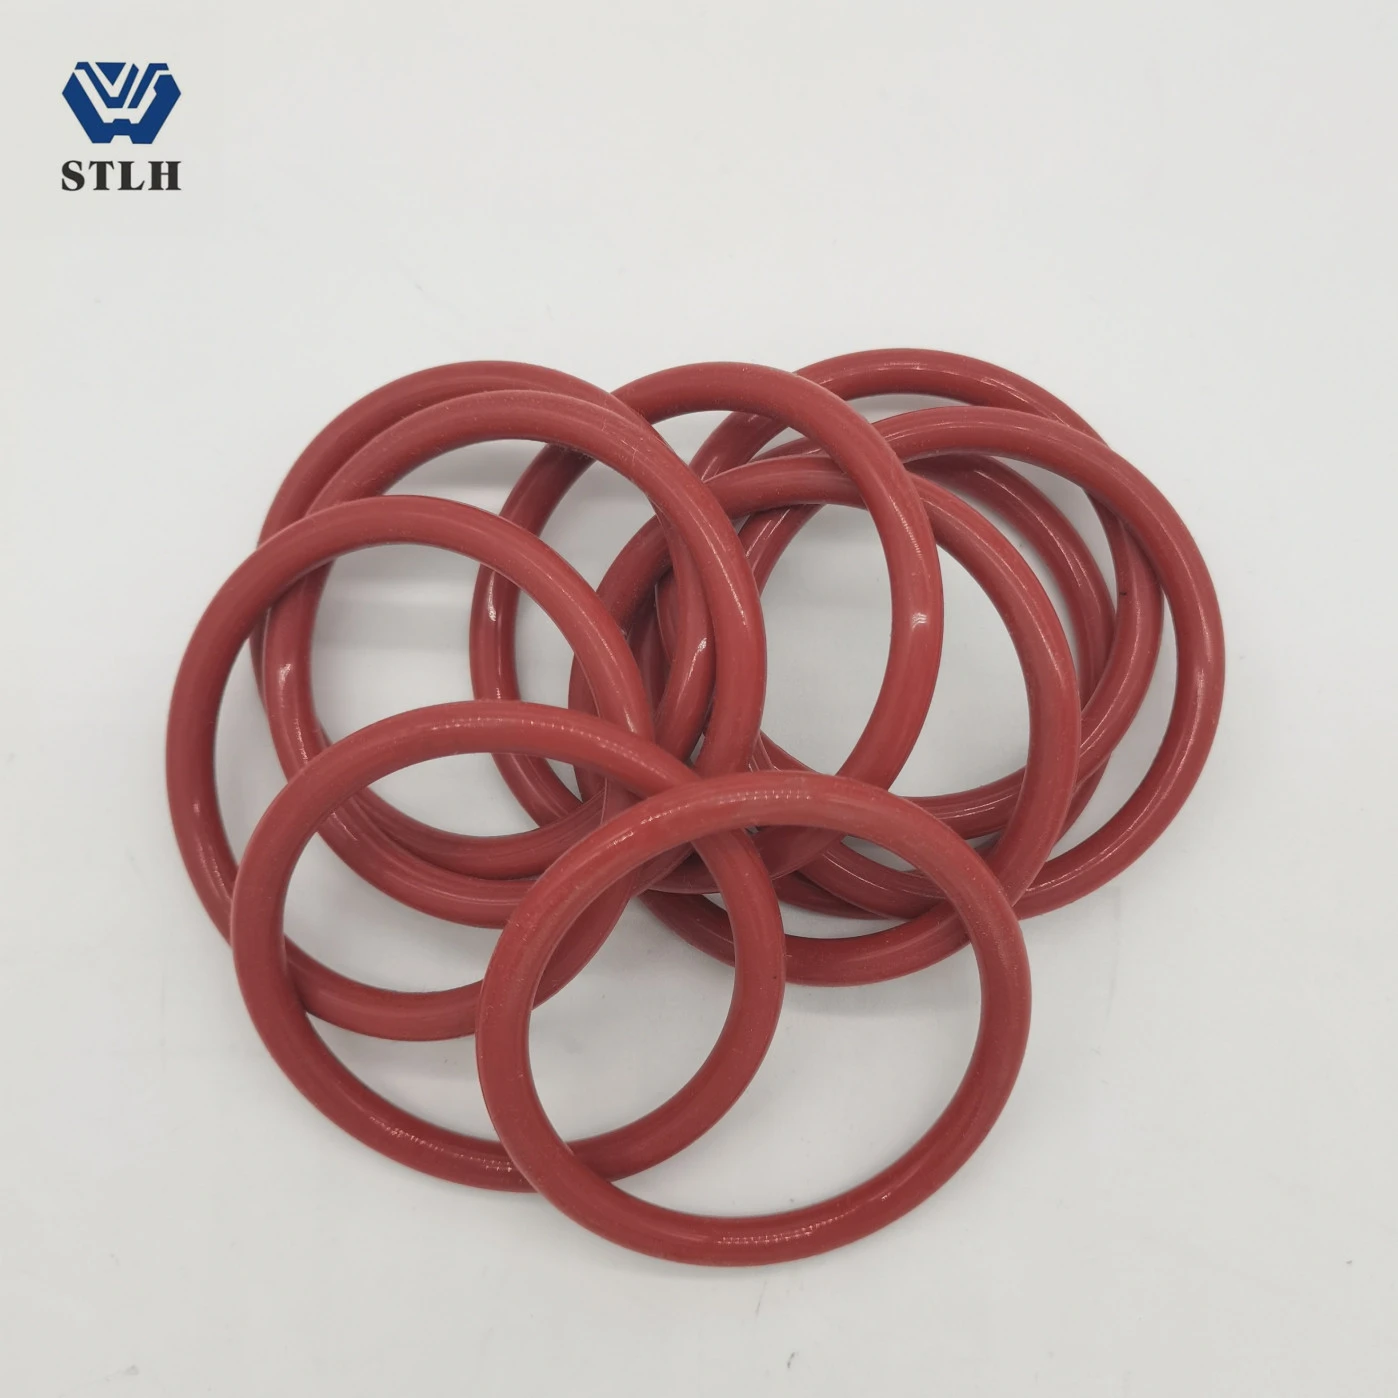 1 1.5 2 2.2 2.5 3 4 5 6 7 8 9mm thickness molded silicone O rings o ring maker all sizes nitrile rubber seal rings